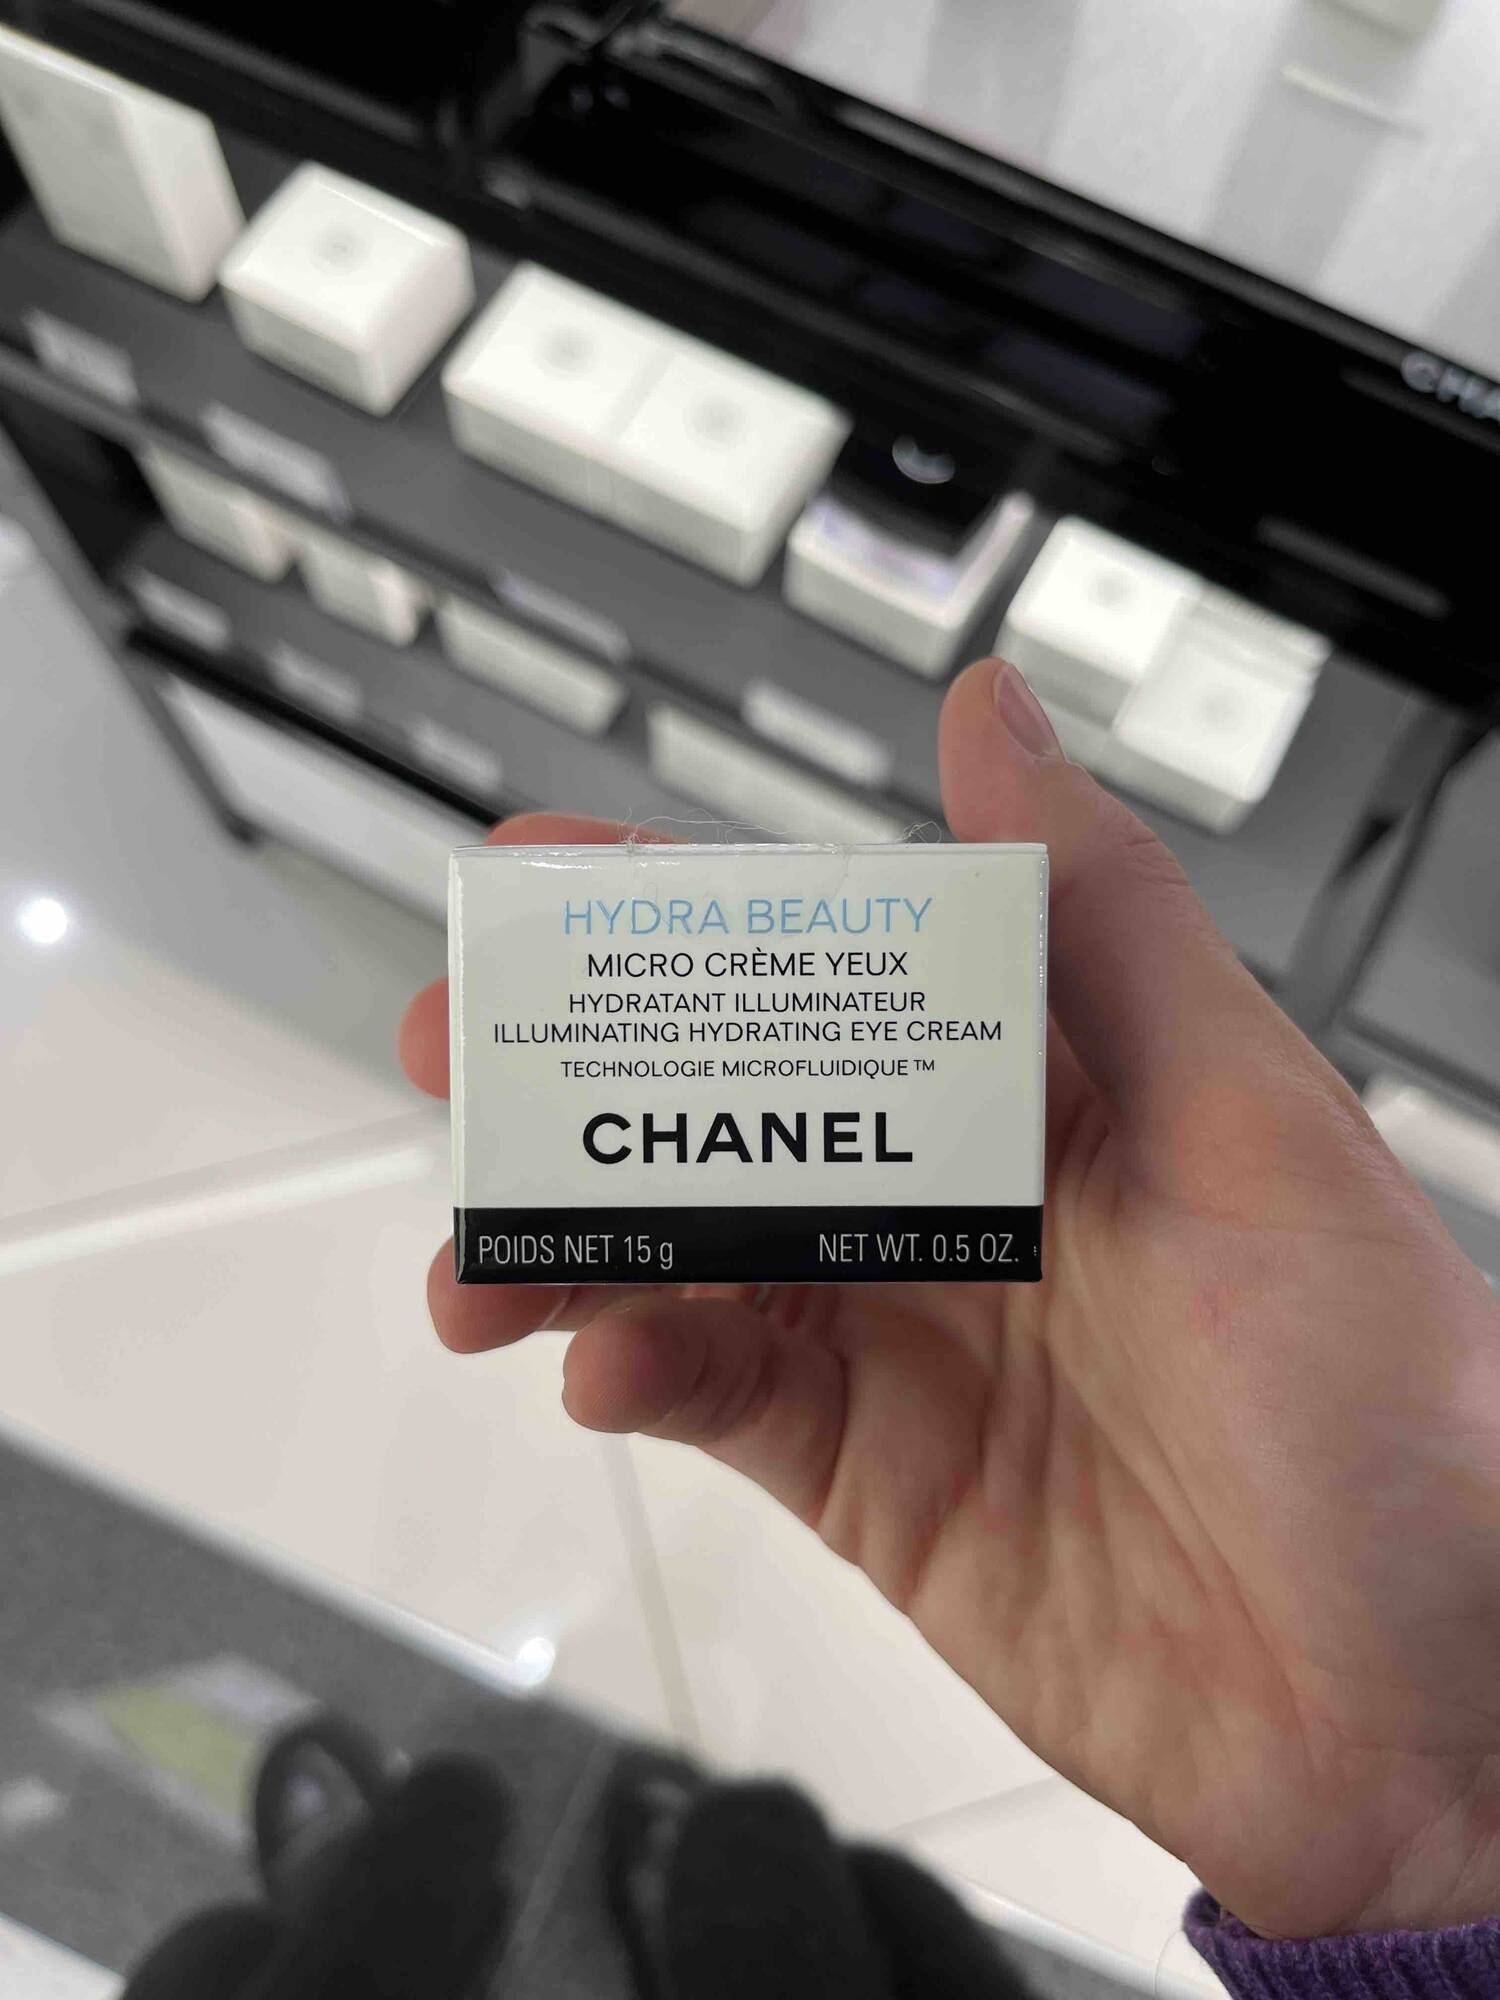 CHANEL - Hydra beauty - Micro crème yeux